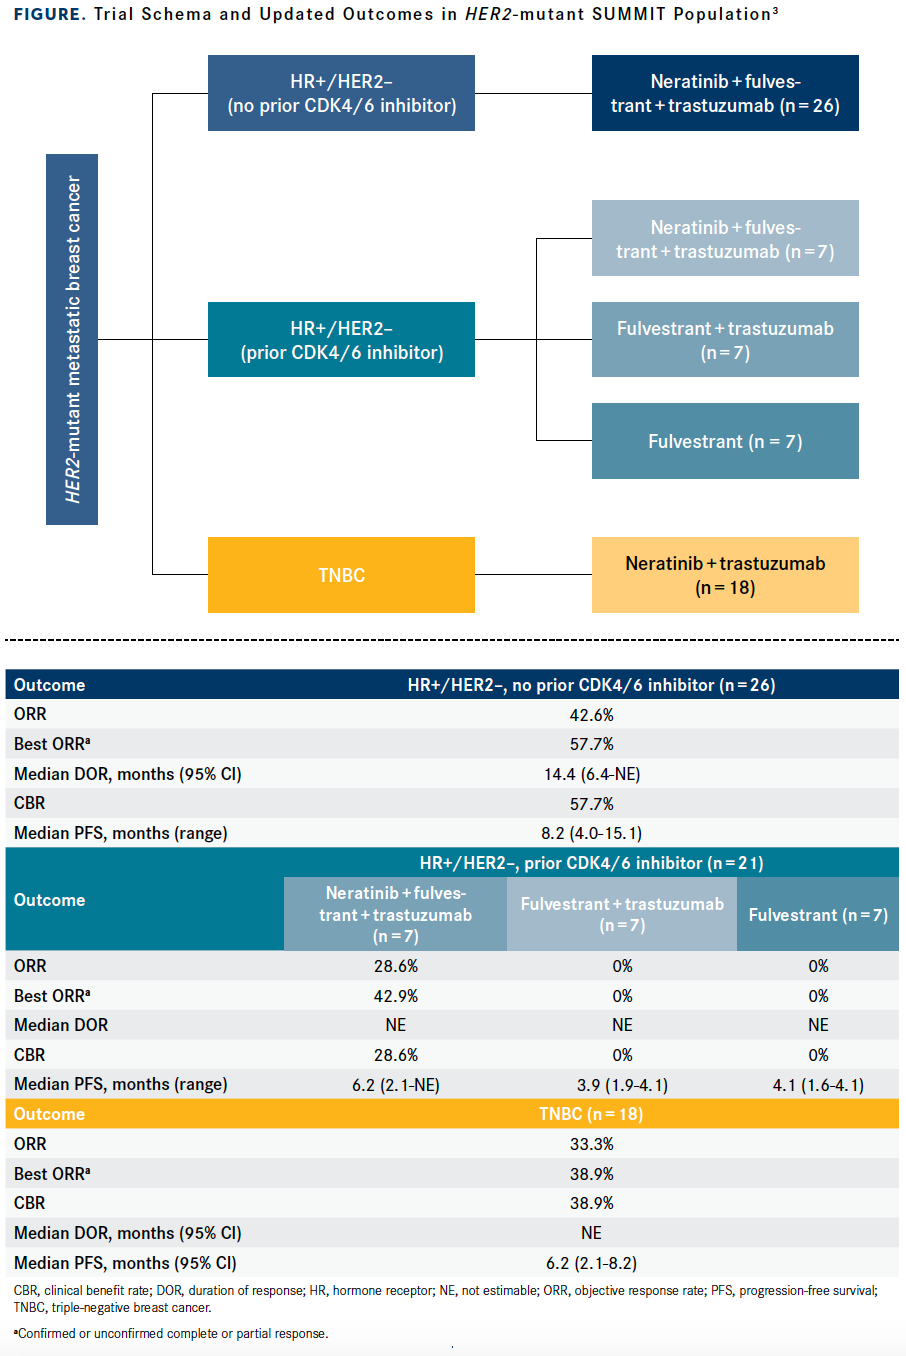 Figure. Trial Schema and Updated Outcomes in HER2-mutant SUMMIT Population3